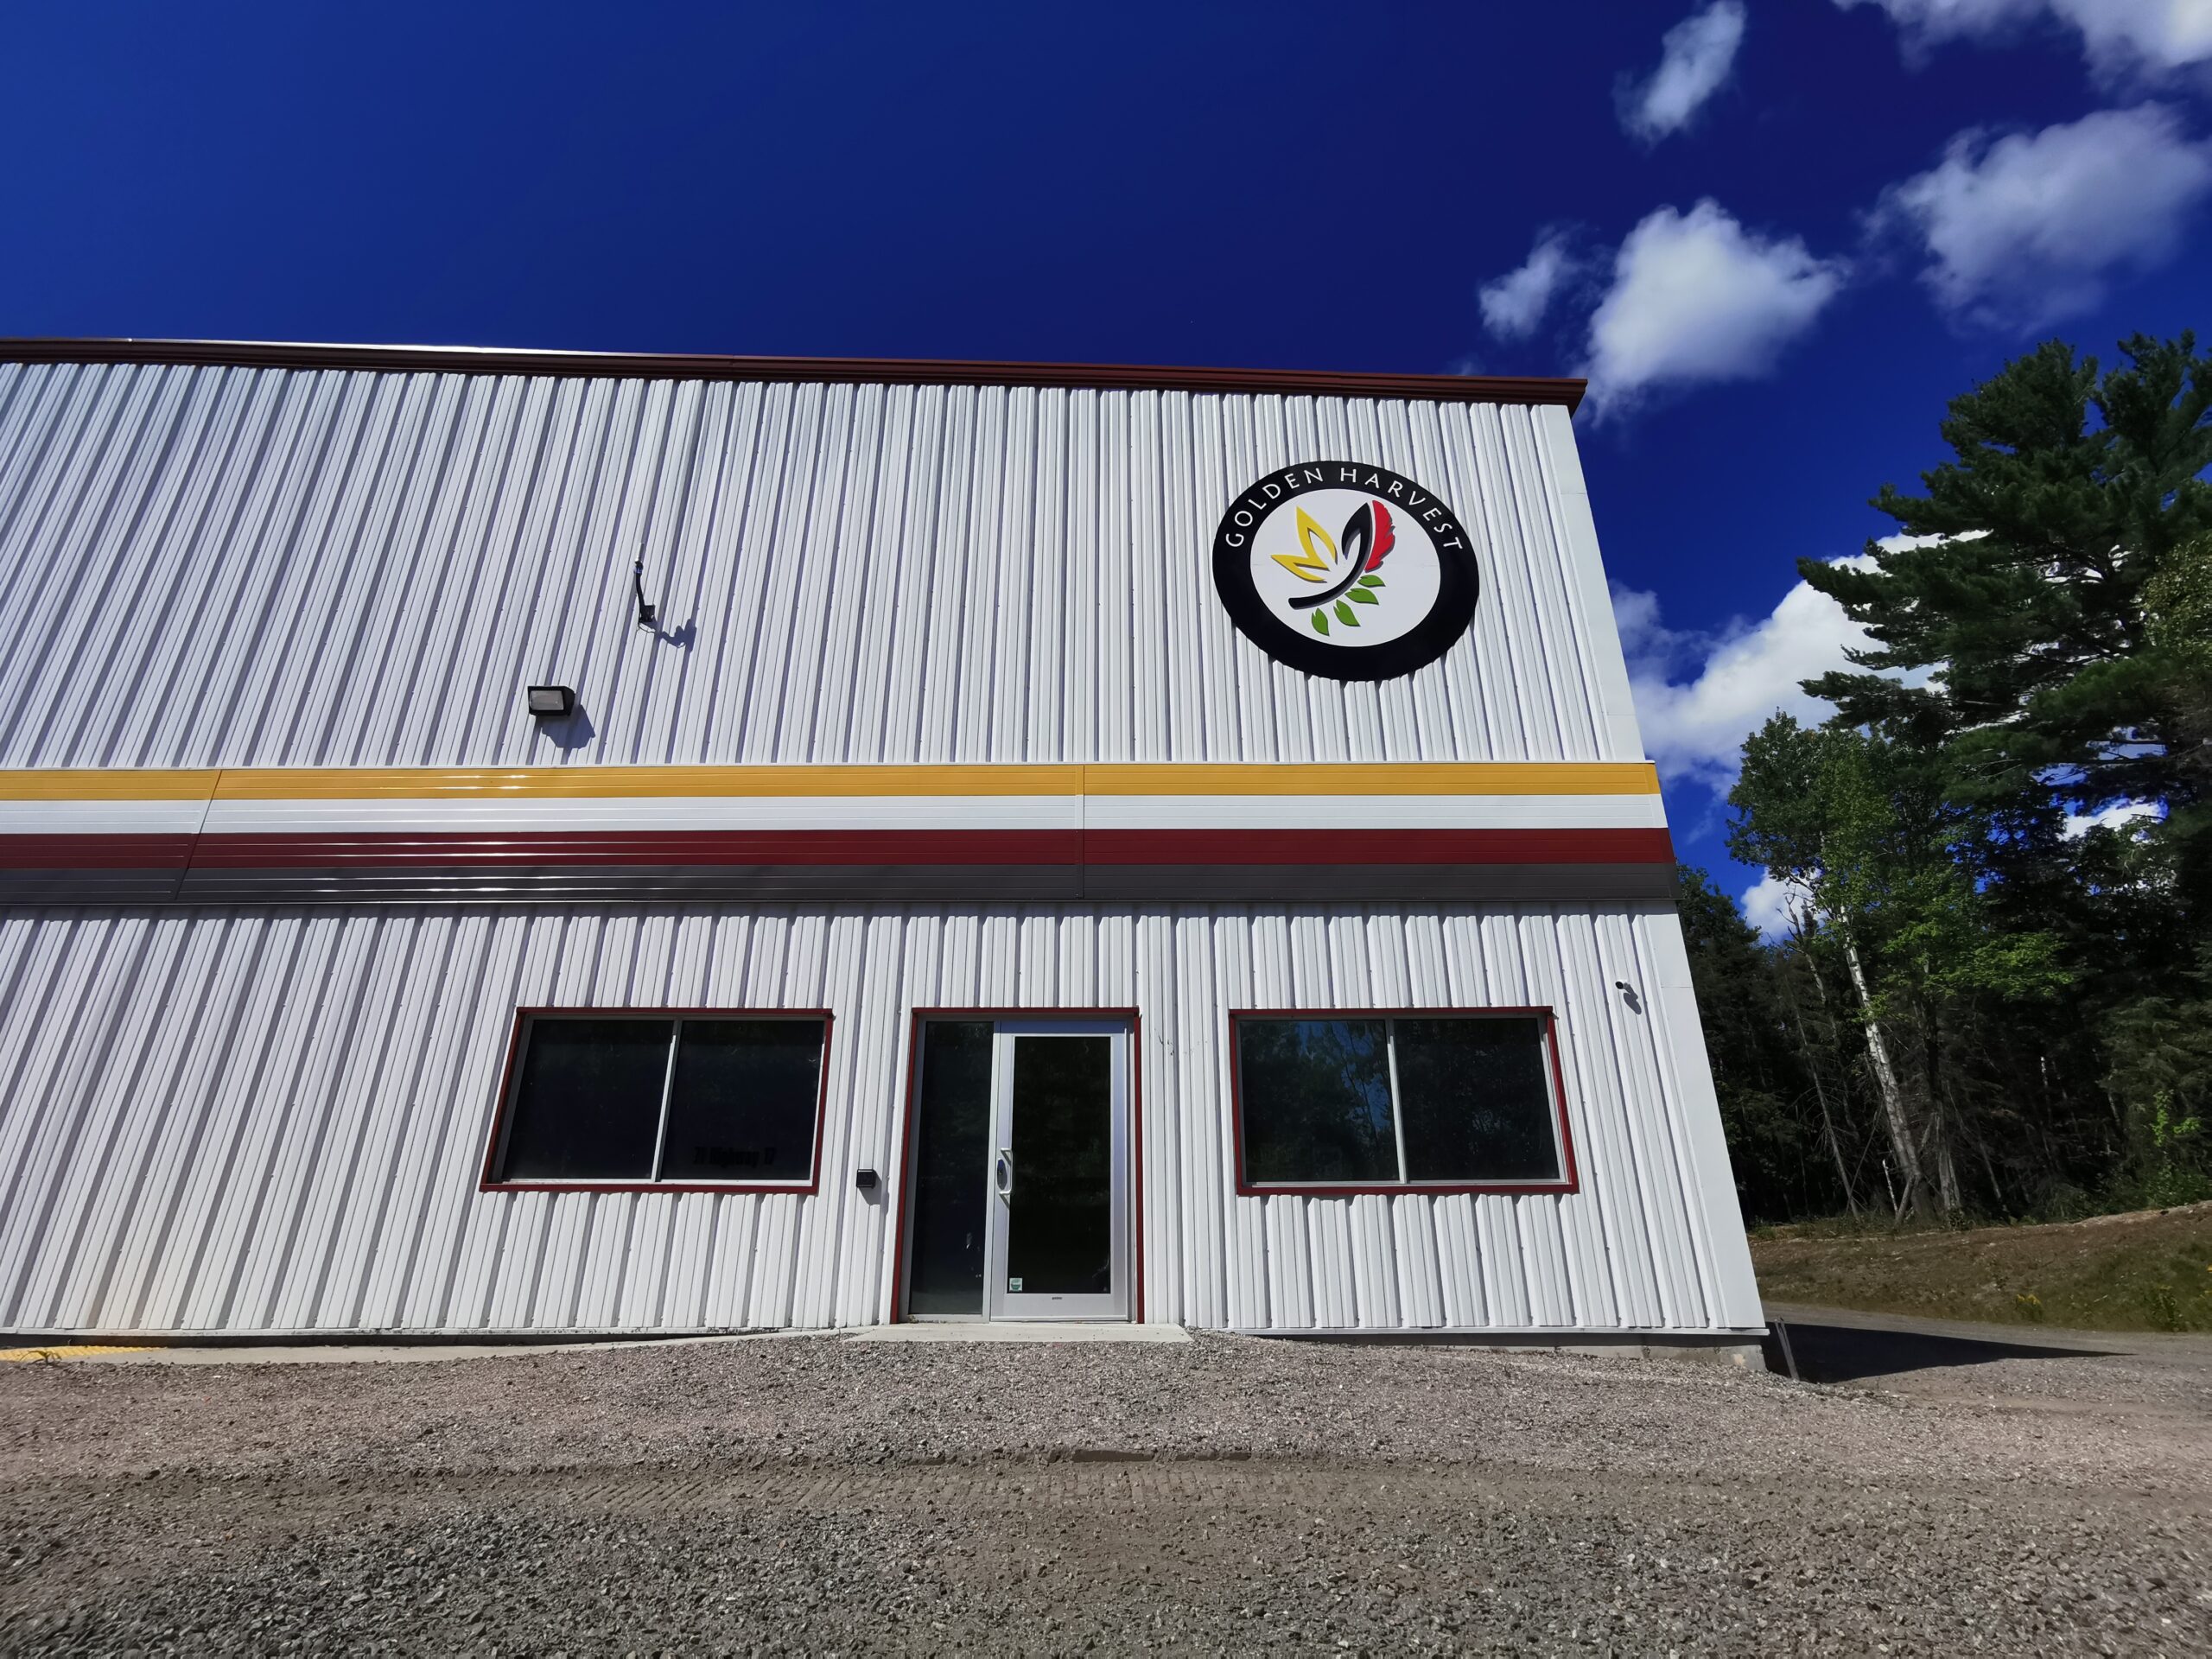 The outside entrance of provincially authorized Cannabis retailer: Golden Harvest